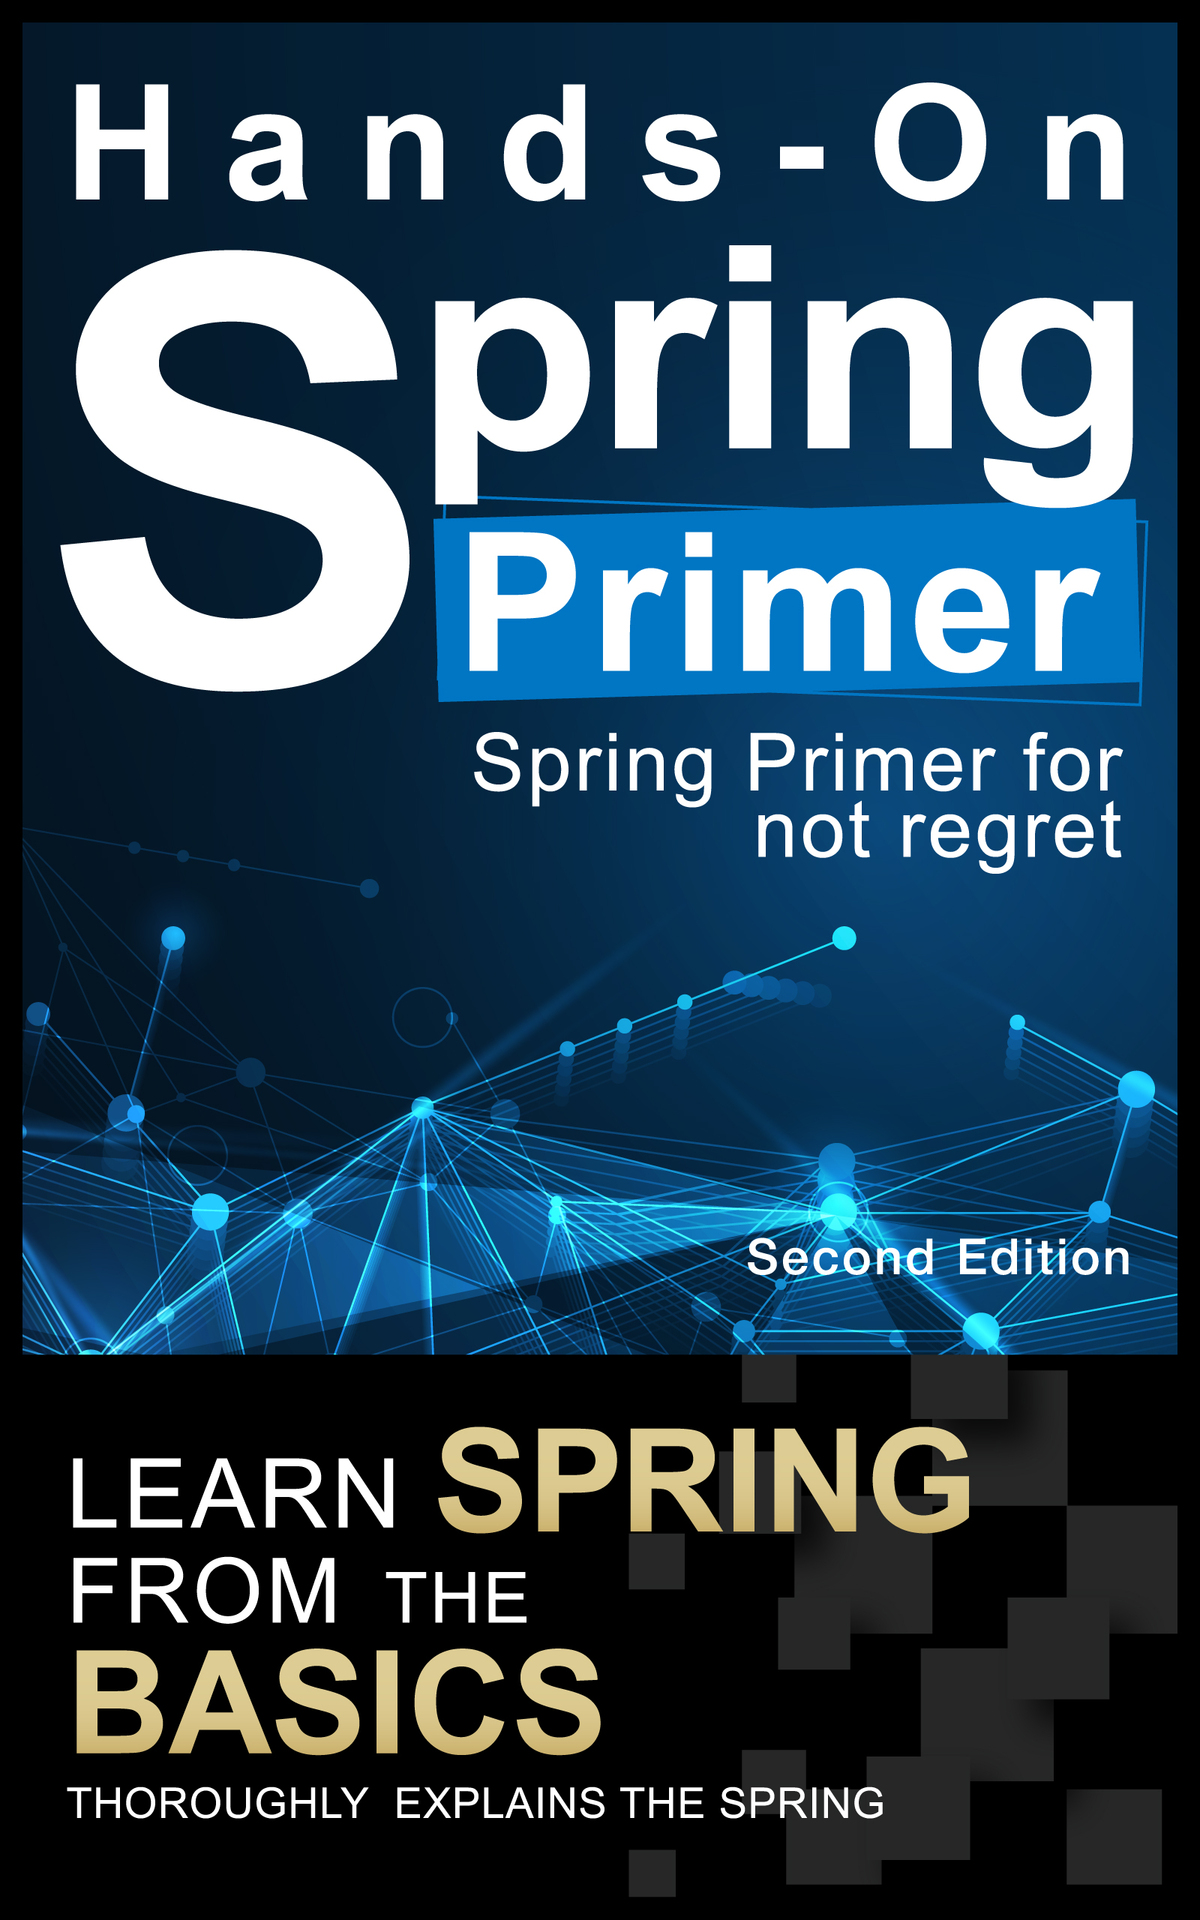 Spring Boot Prime: An introductory book to not regret: [Hands-On] Learn spring boot 2.4 from the basics~ Java, Spring Data JPA, Spring MVC, Spring Security, Spring Web, Mybatis, Spring Framework